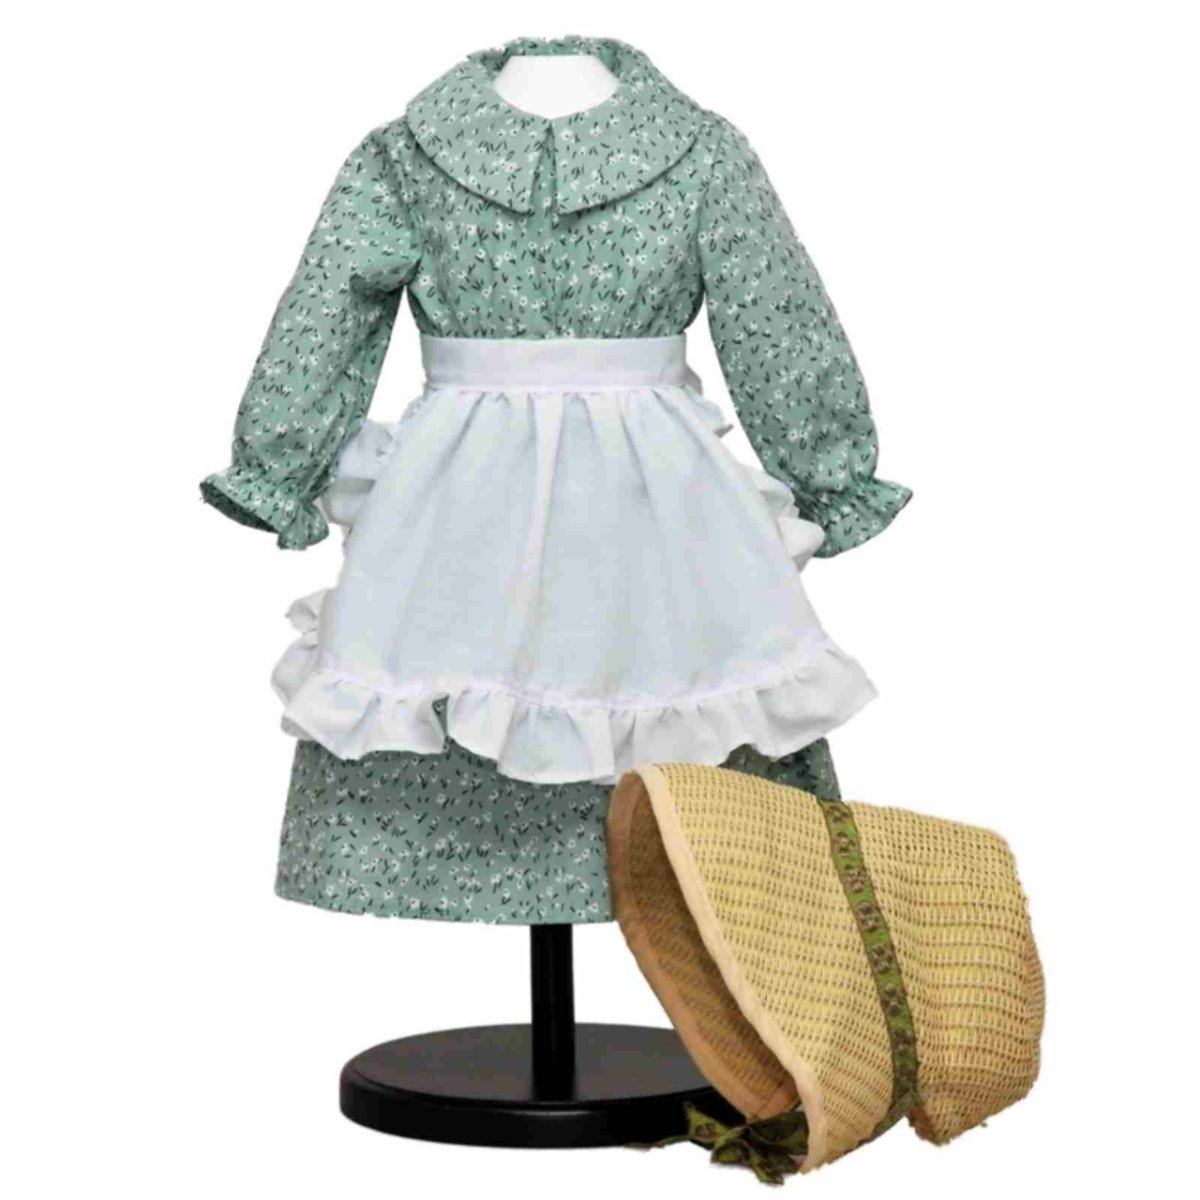 Queen's Treasures Green Calico Prairie Dress, Apron, and Bonnet, Clothes for 18 Inch Dolls - Simon's Collectibles